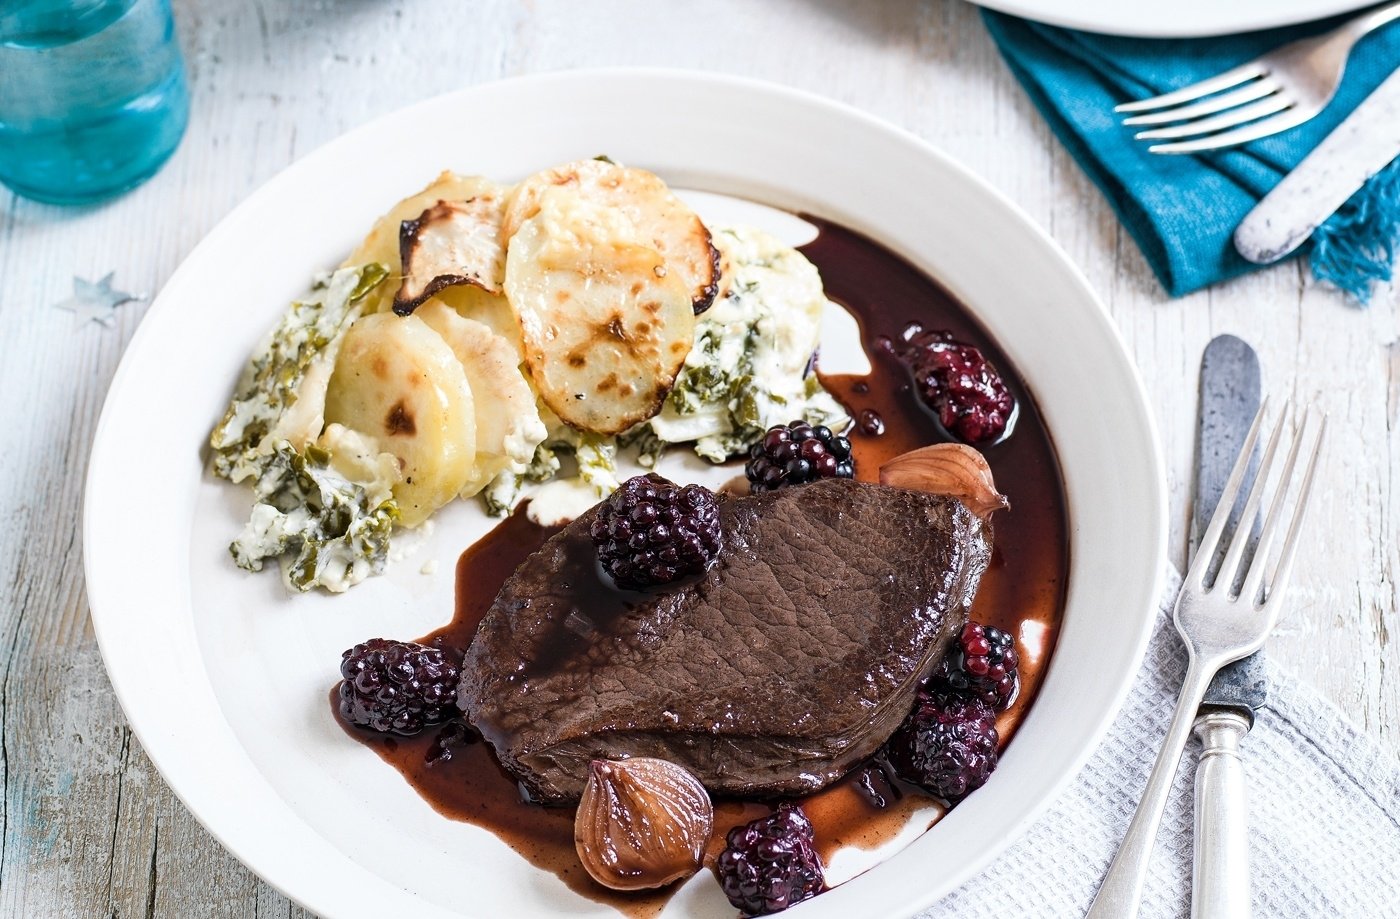 10 Great Steak Dinner Ideas For Two venison steaks with sloe gin sauce recipe dinner ideas for two 2022